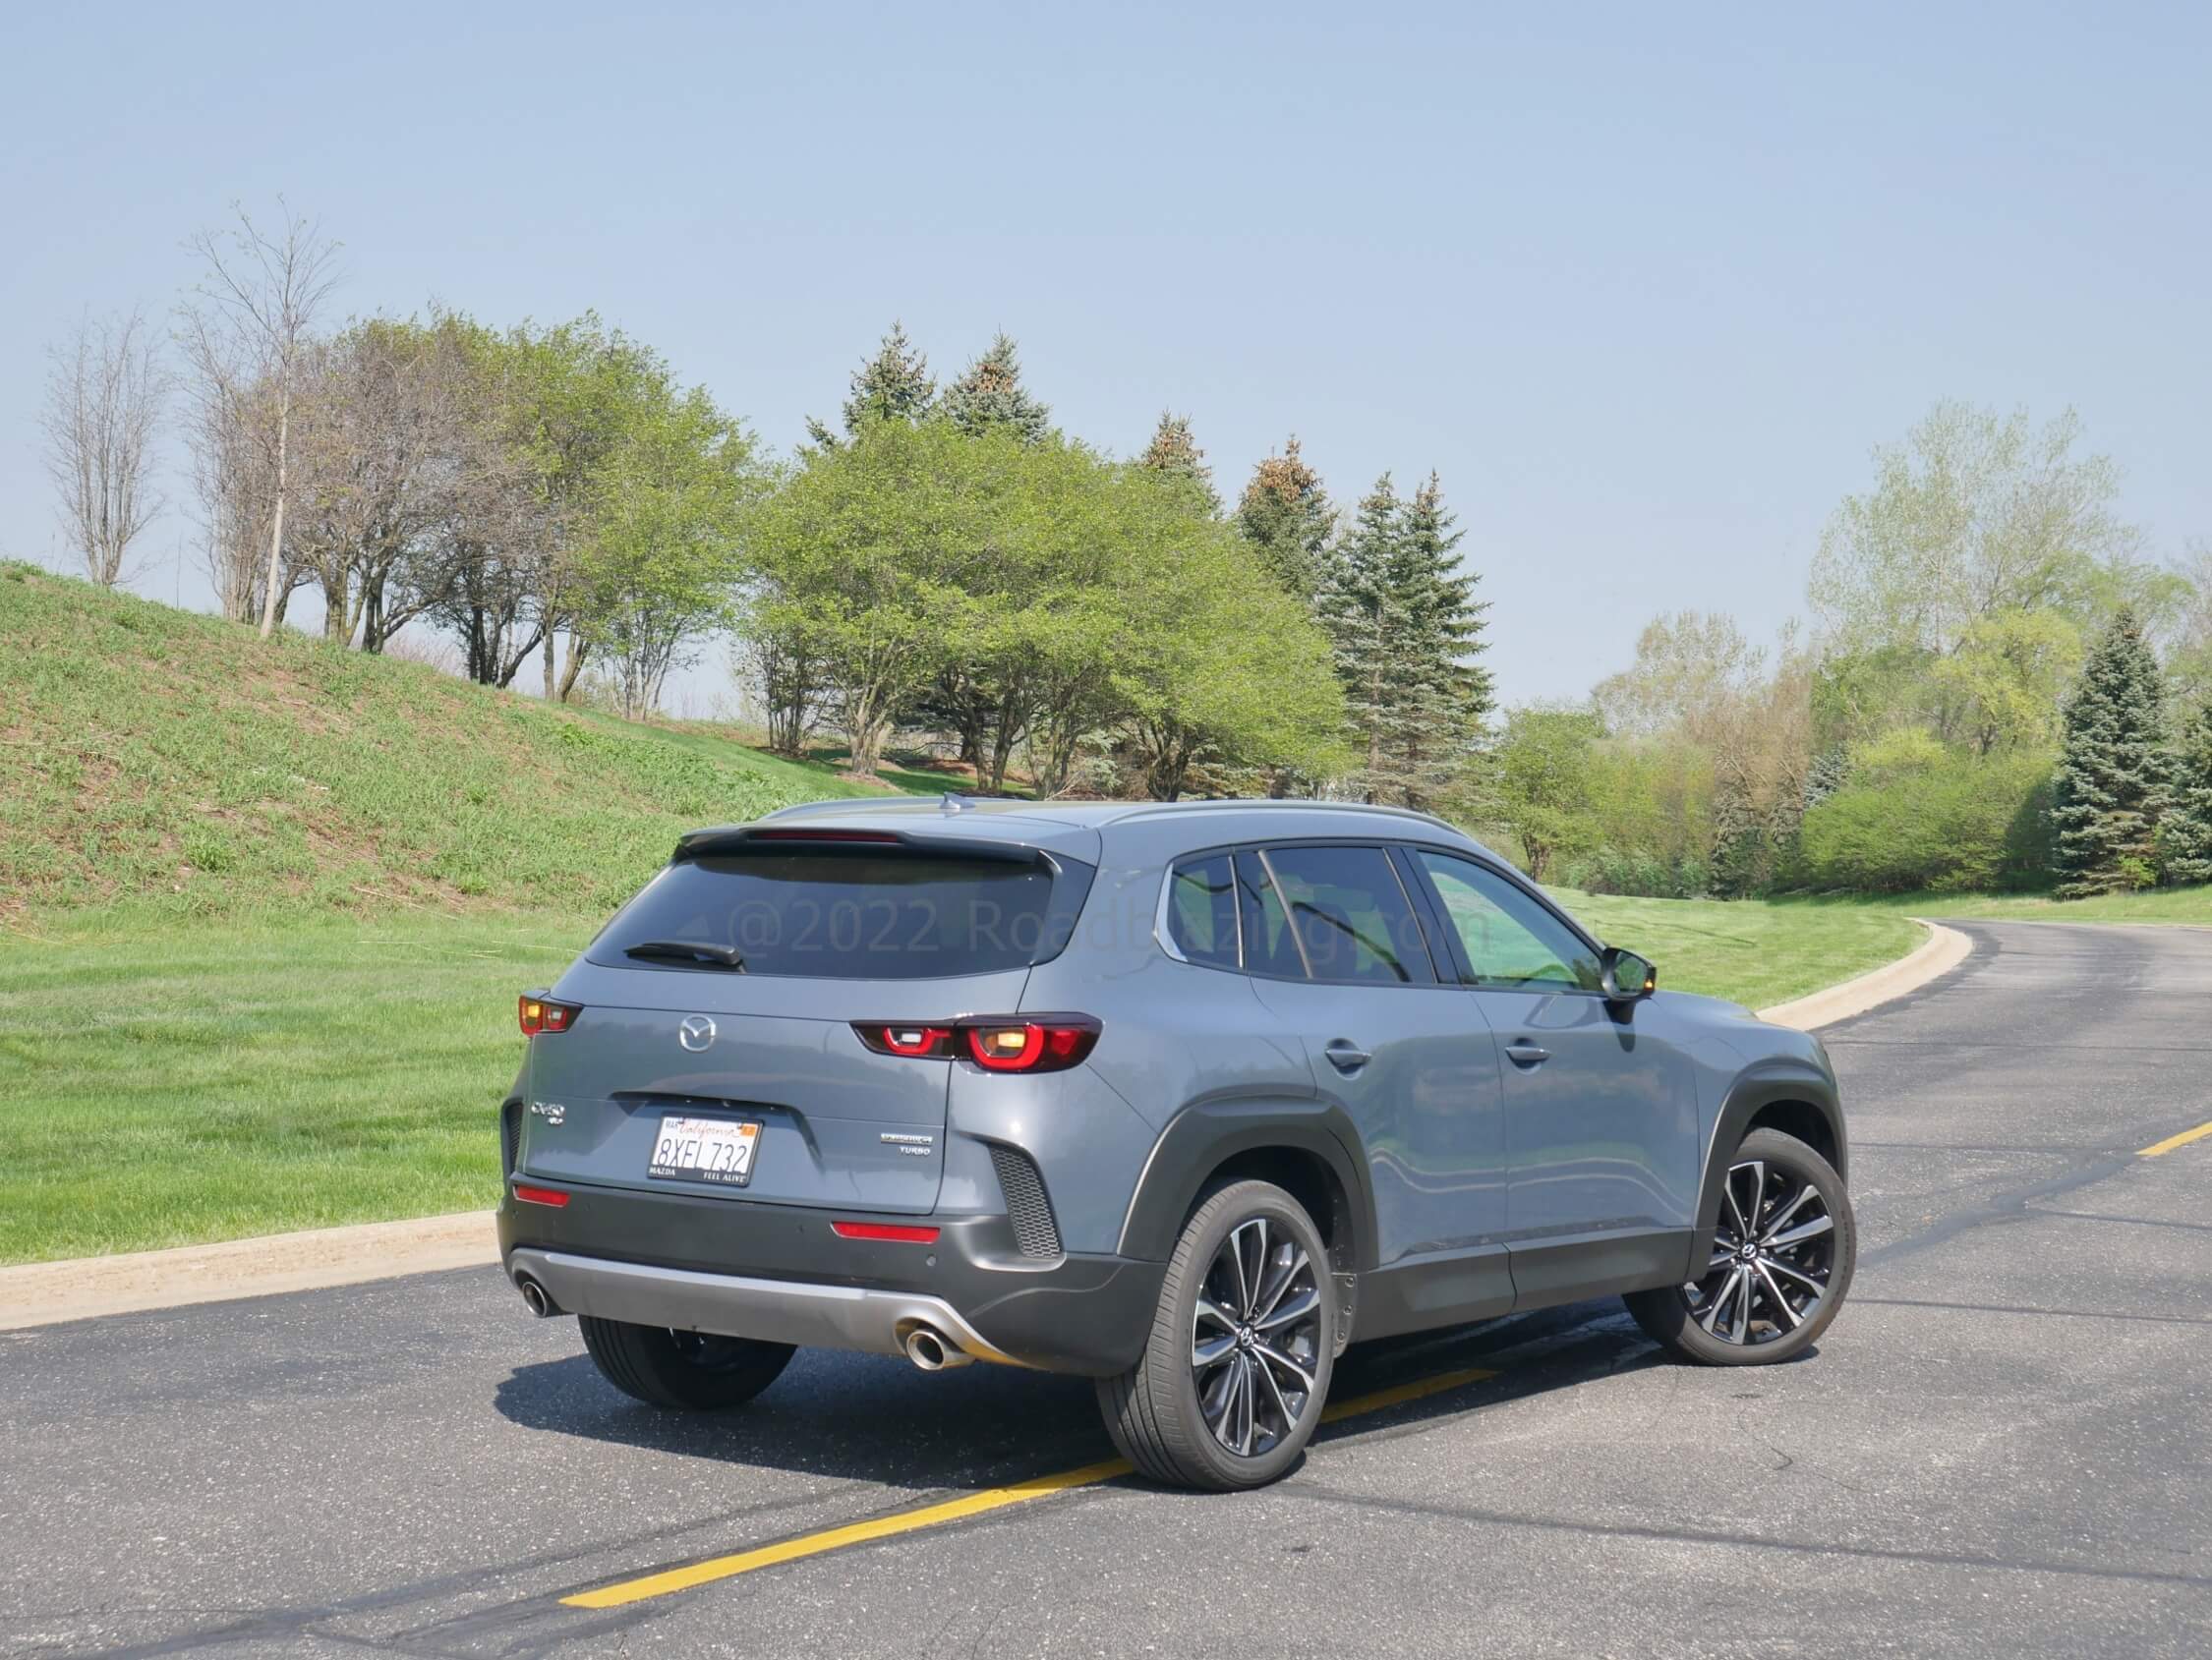 2023 Mazda CX-50 2.5 Turbo: Taller rising beltline + lower roof + punched out liftgate vs. CX-5